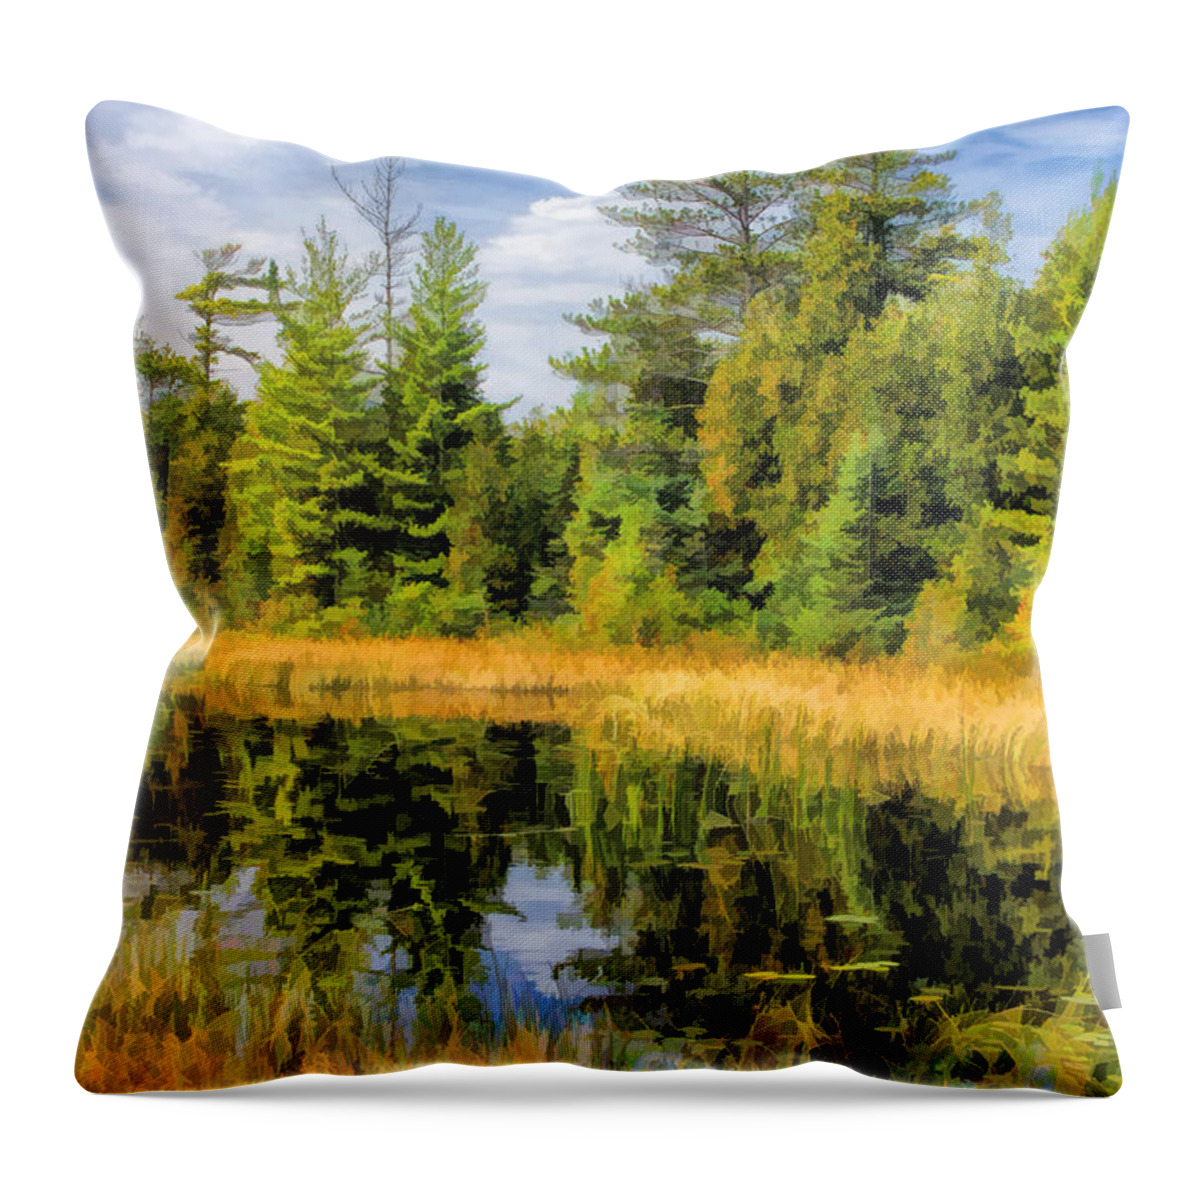 Door County Throw Pillow featuring the painting Ridges Sanctuary Reflections by Christopher Arndt